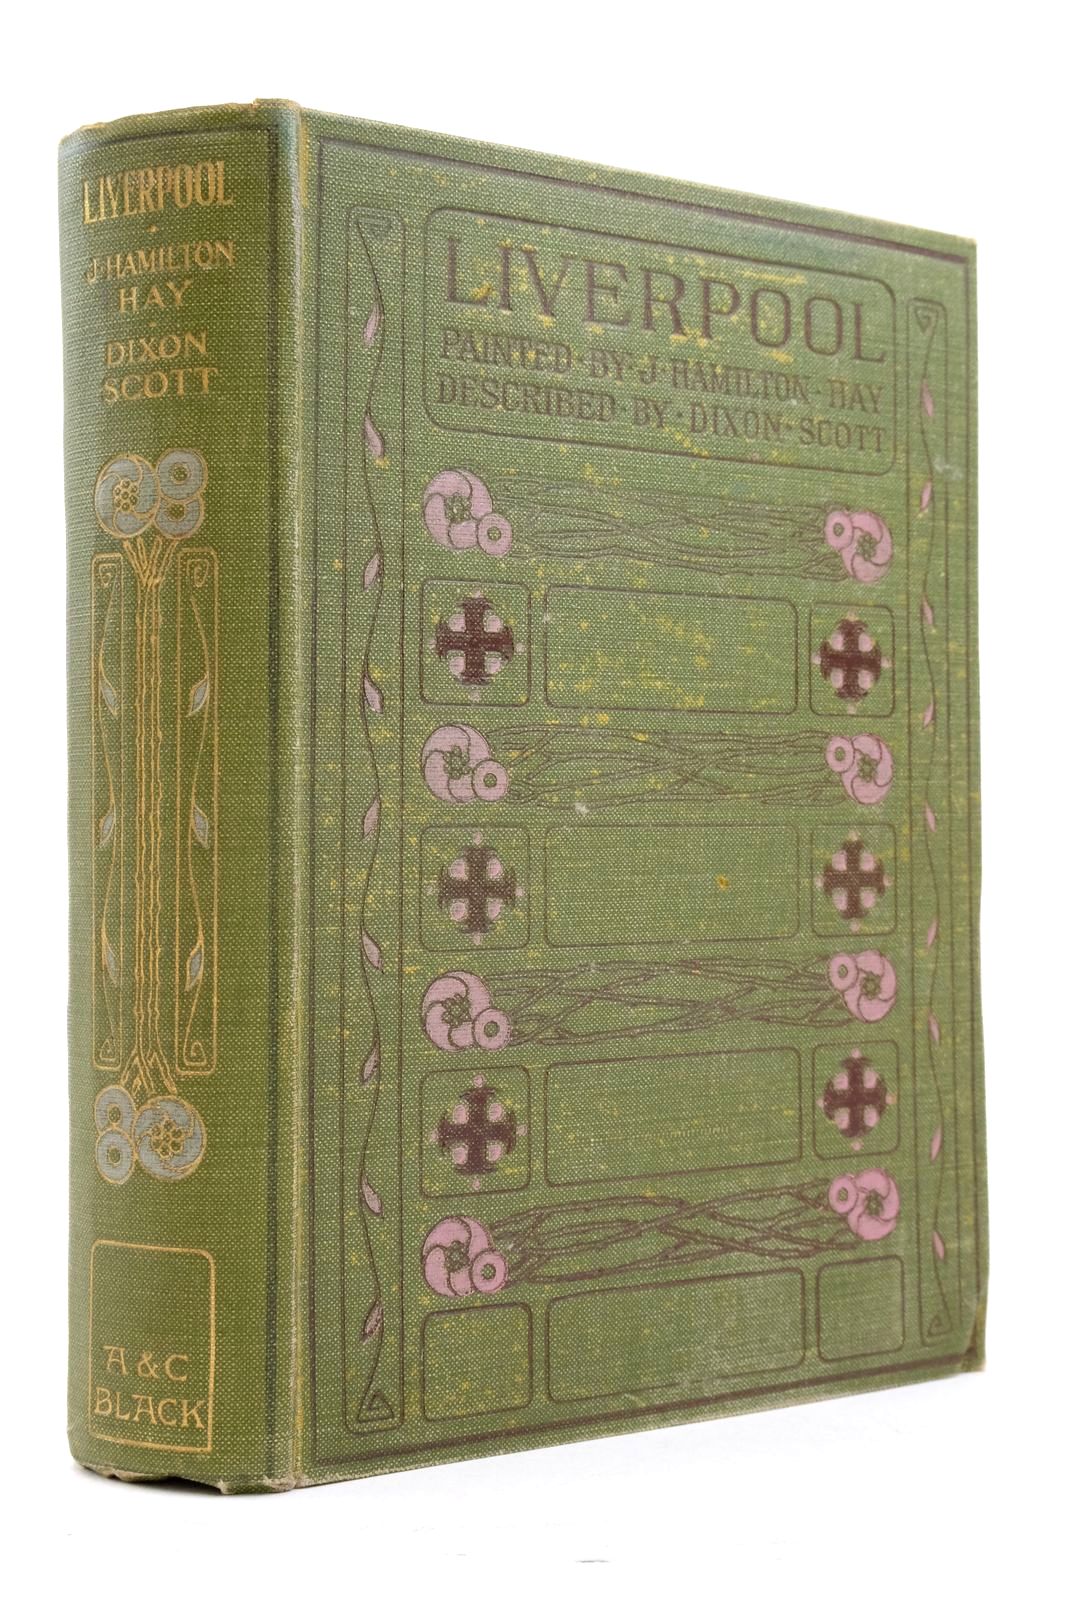 Photo of LIVERPOOL written by Scott, Dixon illustrated by Hay, J. Hamilton published by Adam & Charles Black (STOCK CODE: 2136978)  for sale by Stella & Rose's Books